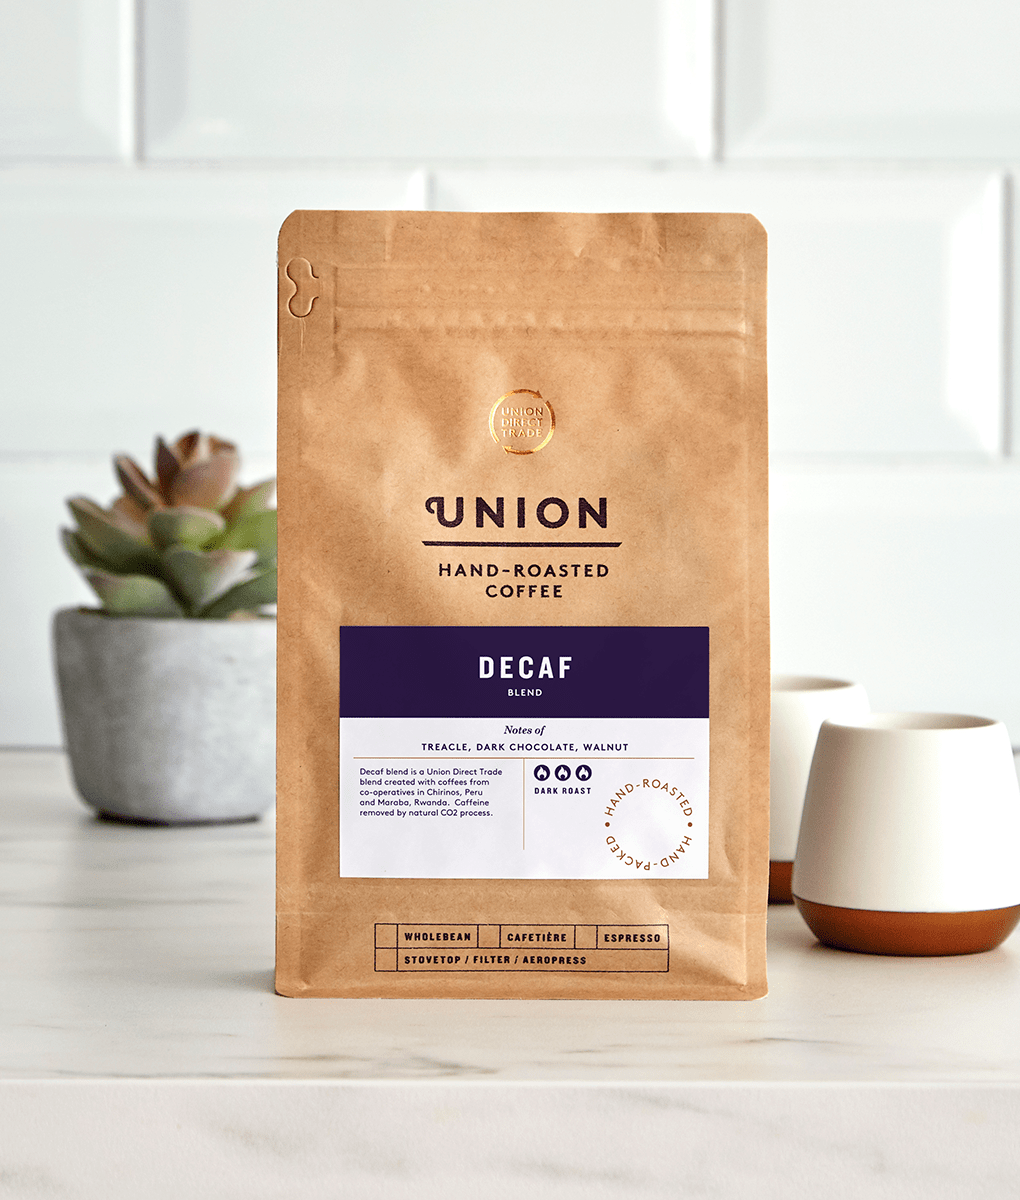 Decaf Blend, Union Coffee Bag,Wholebean,Cafetiere,Filter,Espresso,200g,1kg